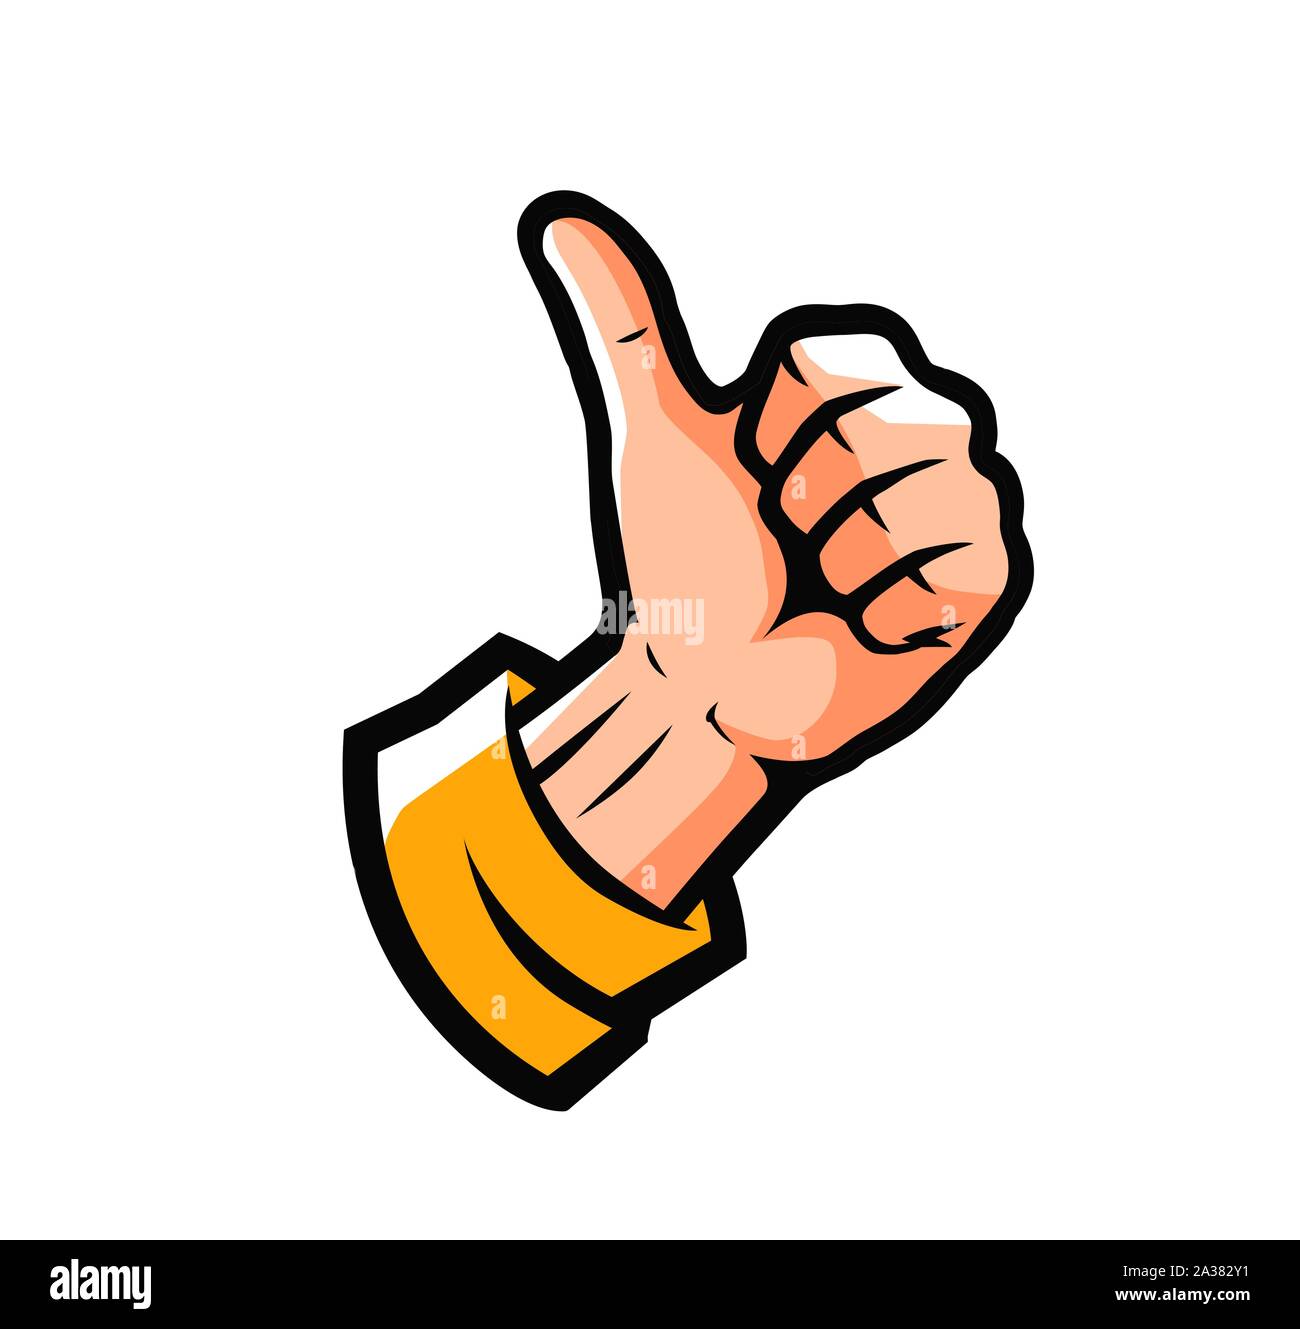 Hand Showing Thumbs Up Symbol Vector Illustration Stock Vector Image